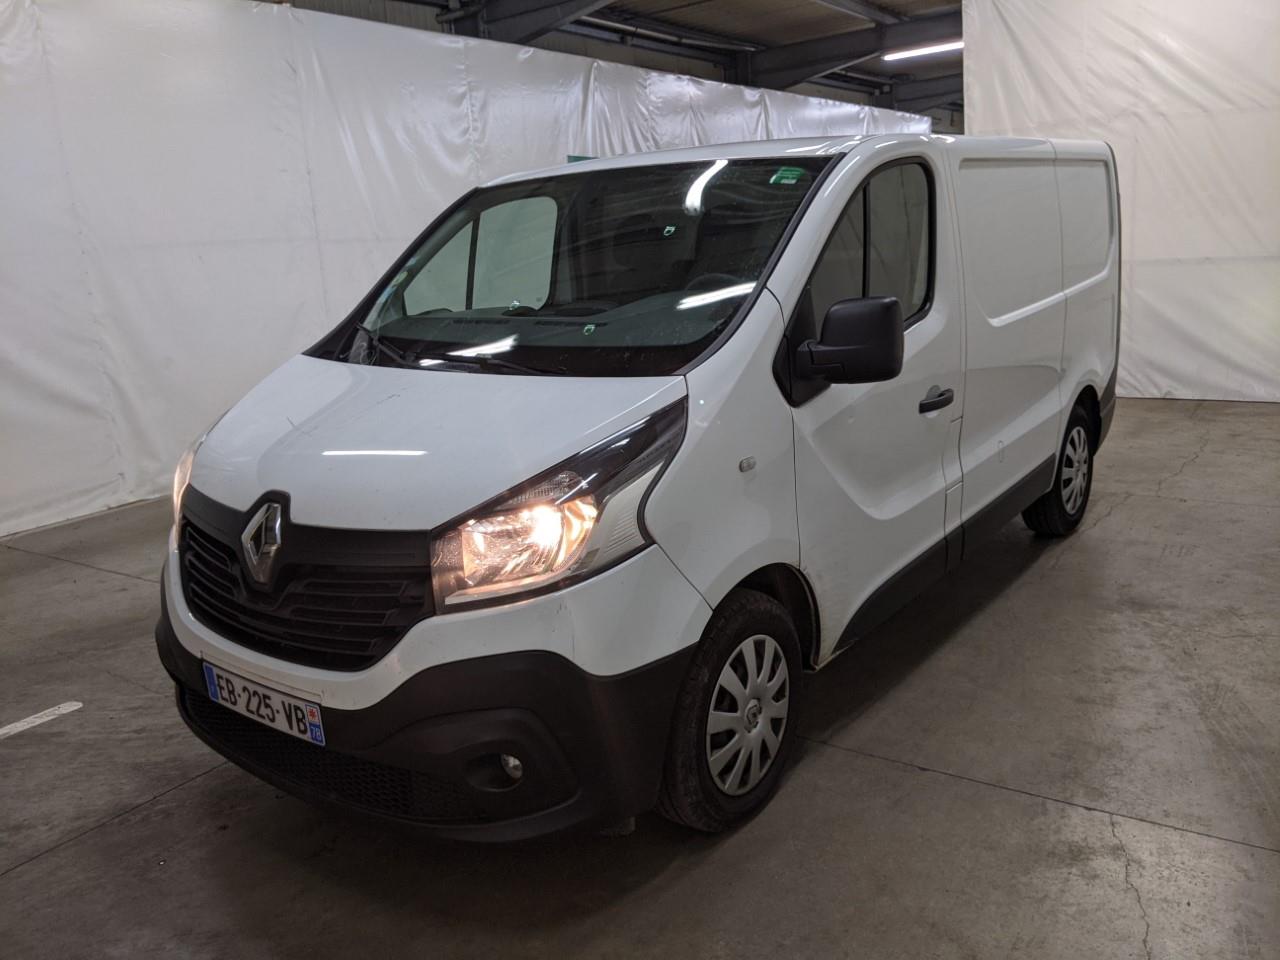 Used Renault Trafic 2016 for Sale Car Auction eCarsTrade